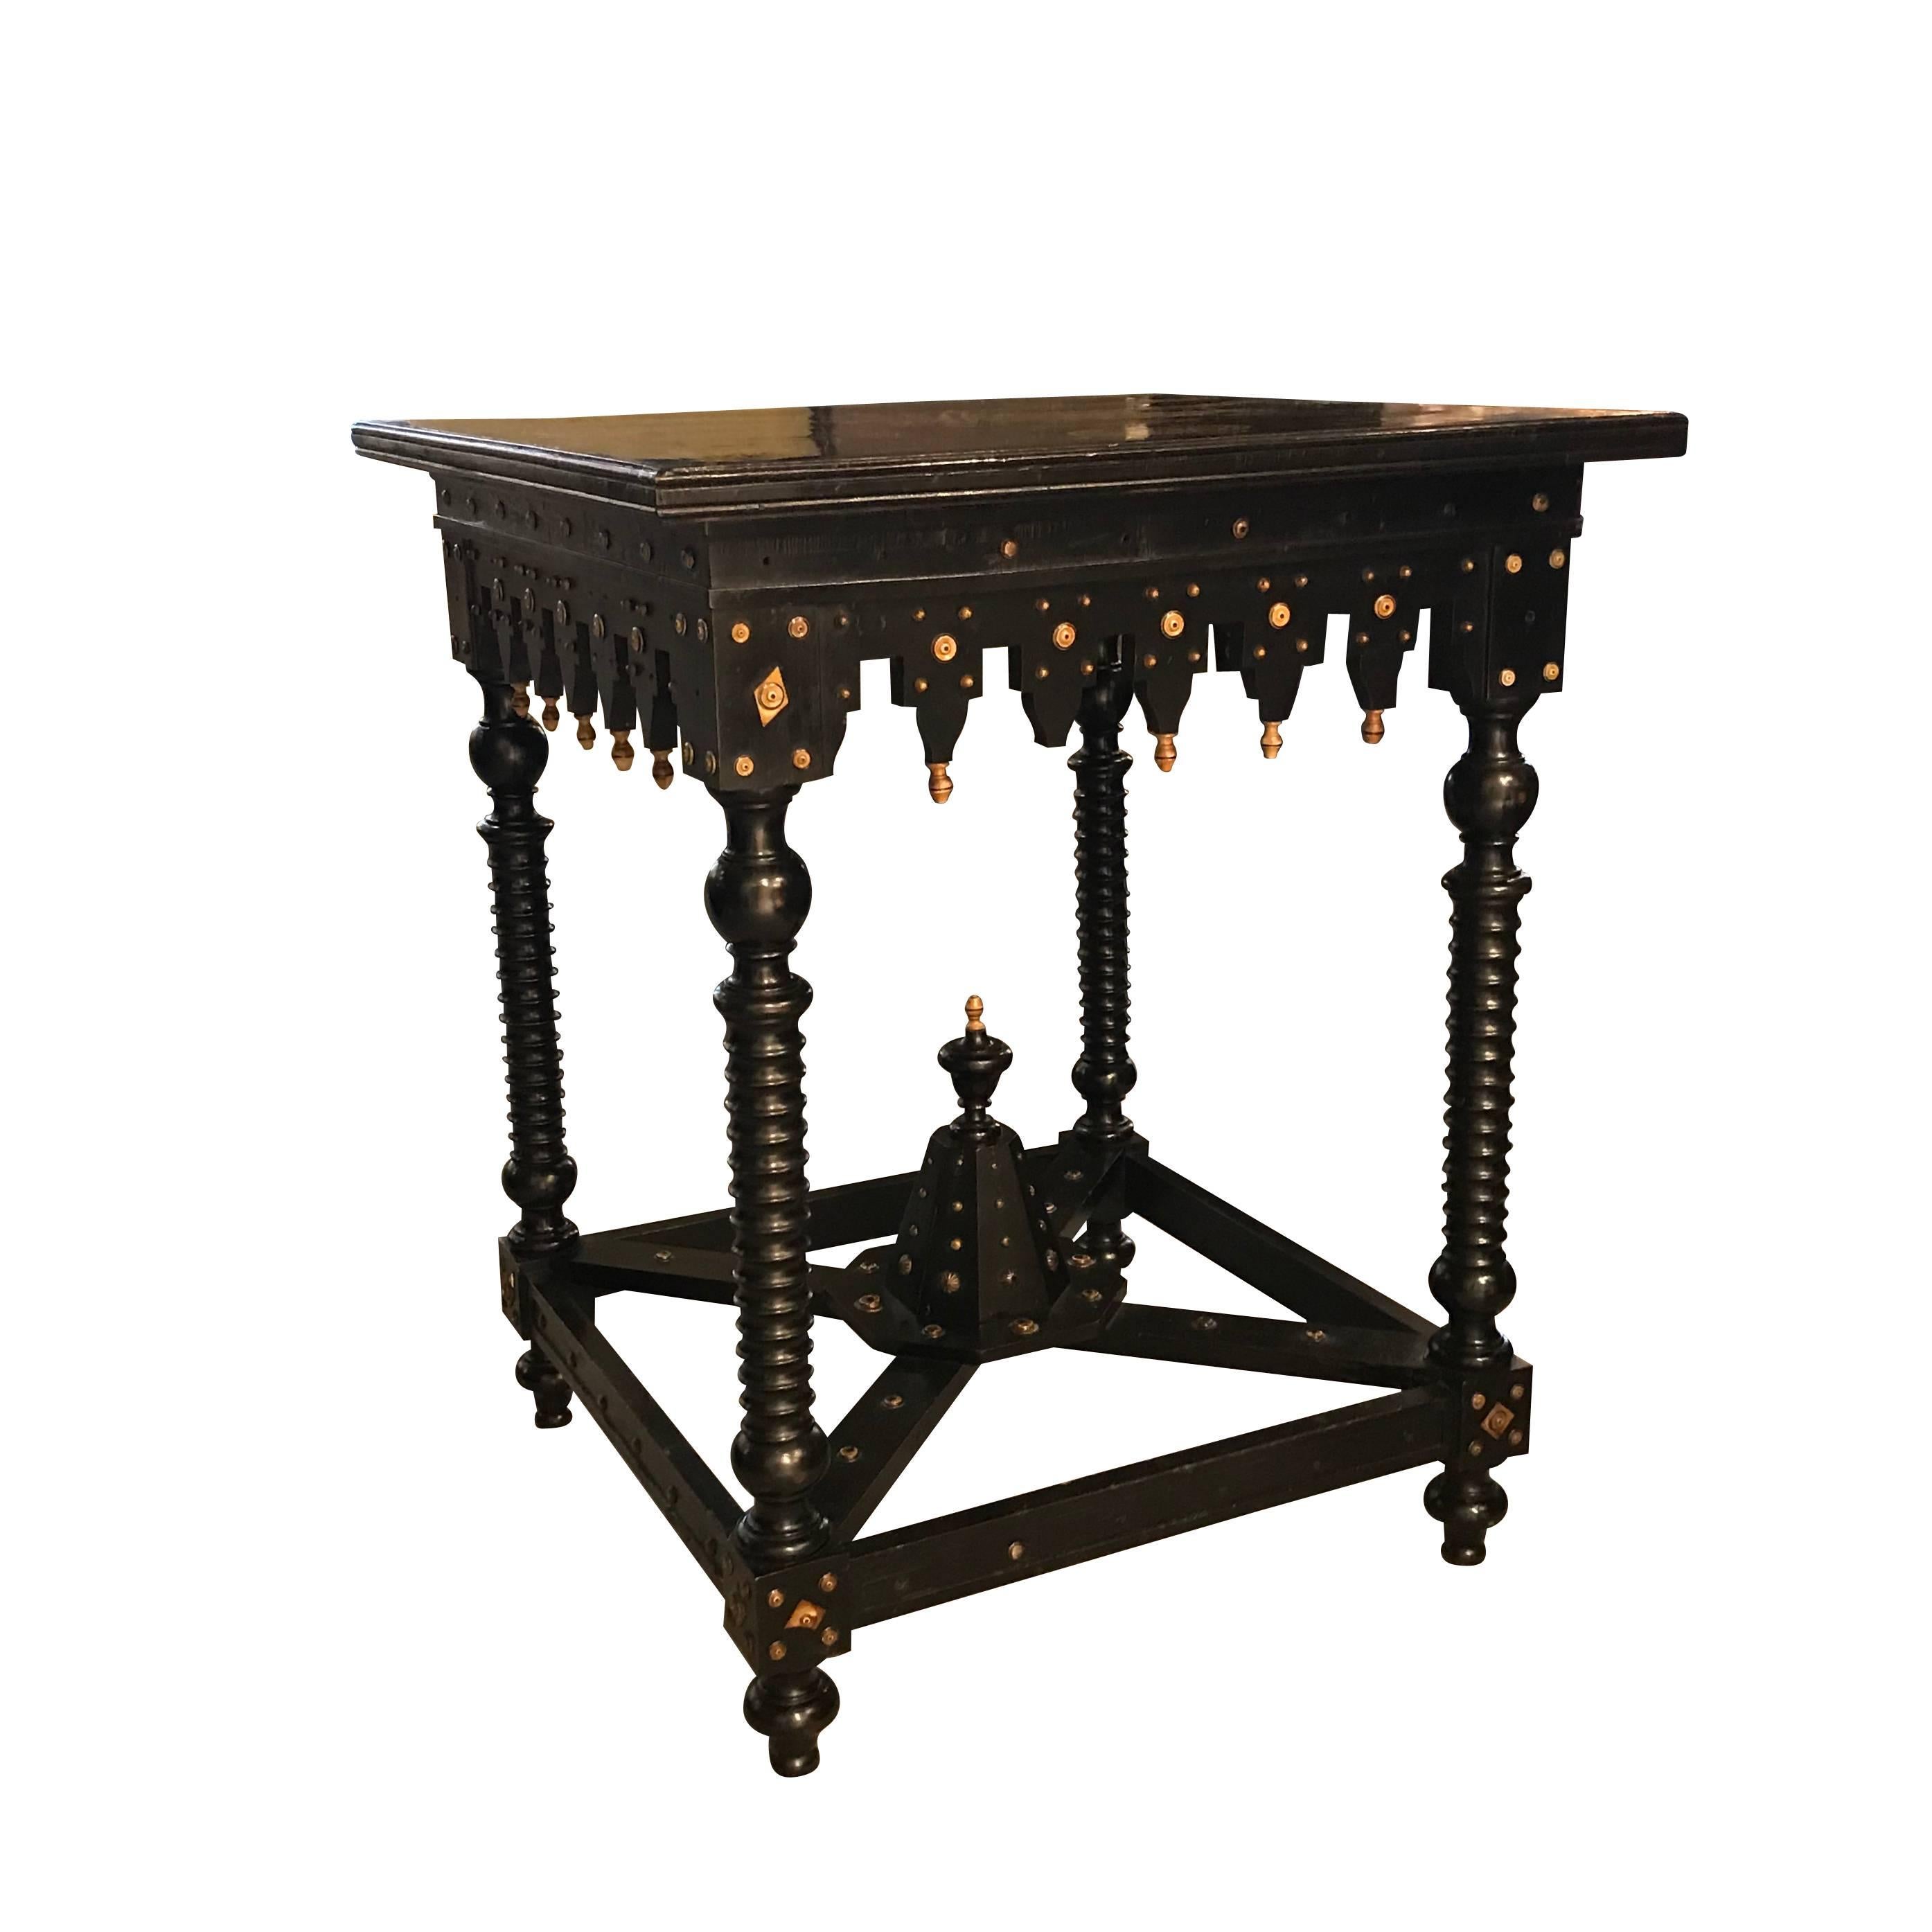 19th century Italian ebonized table with bone inlay.
Decorative details.
Carved gold gilt wood trim details.